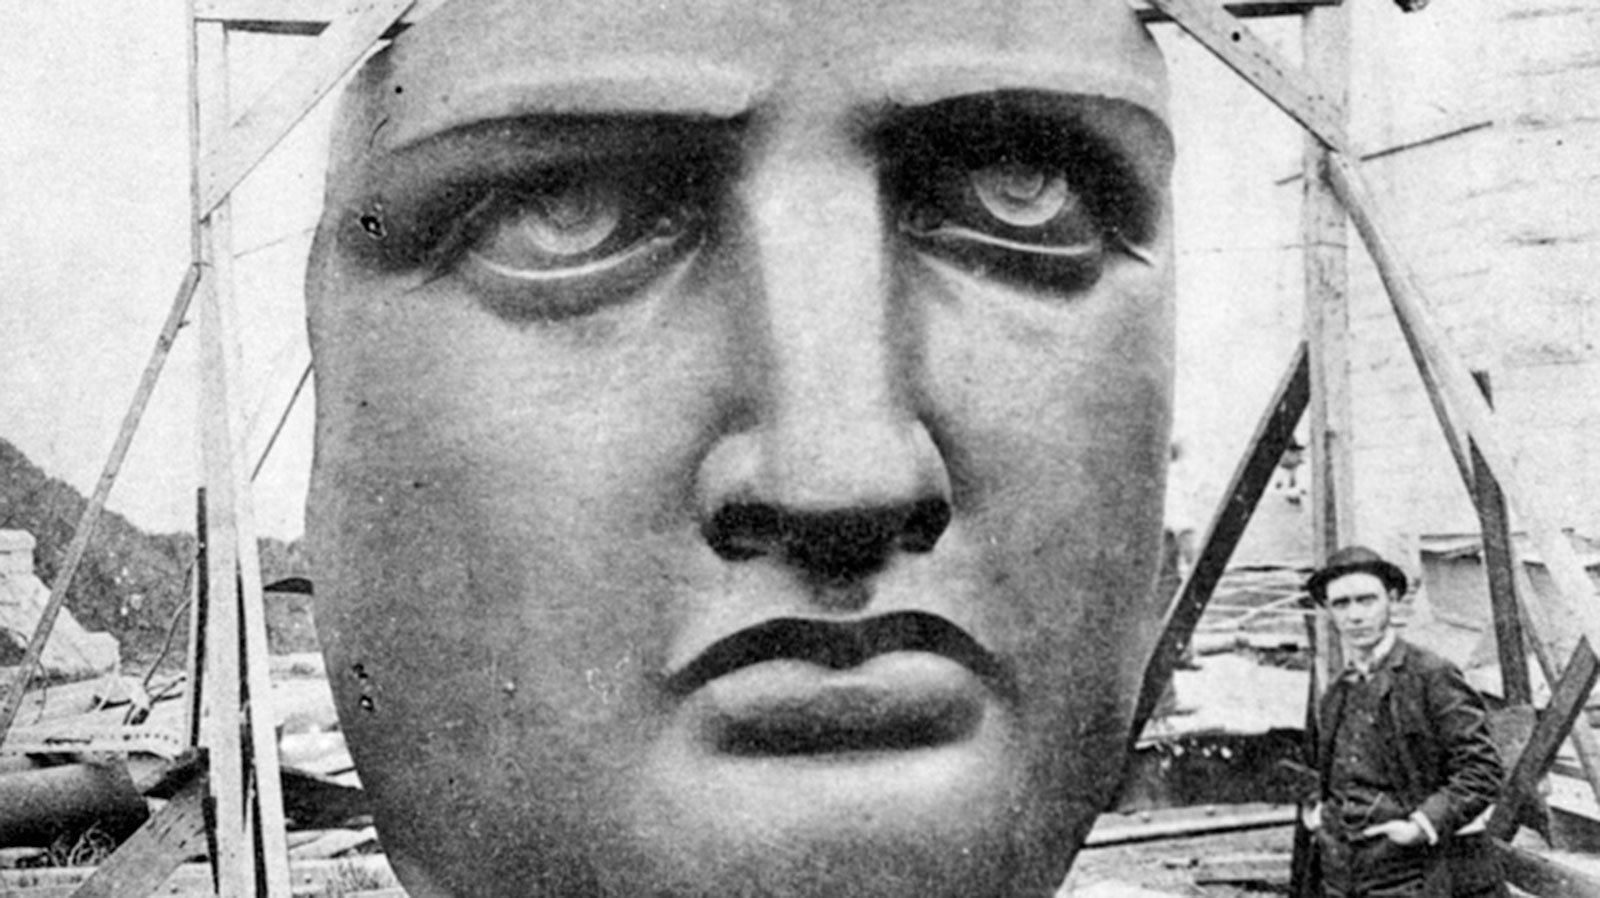 The Statue of Liberty’s face waiting to be installed on Liberty Island, circa 1885